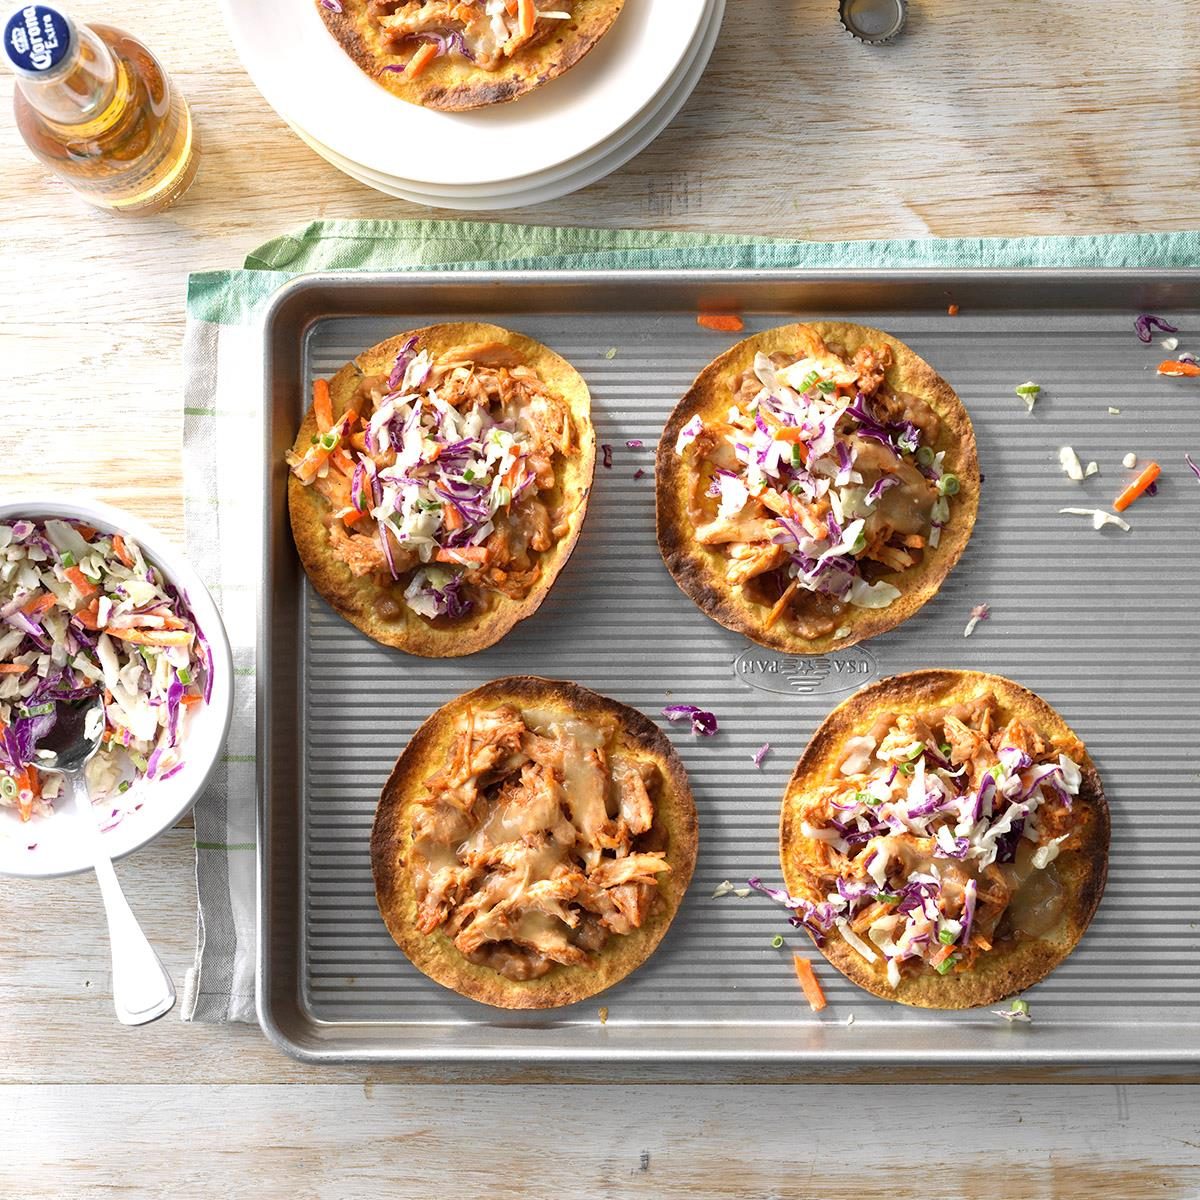 <p>Lots of my recipes (just like this one) start out as fun ways to use leftovers. My kids love tostadas, so this day-after-cookout dinner was a big hit. —Lauren Wyler, Dripping Springs, Texas</p> <div class="listicle-page__buttons"> <div class="listicle-page__cta-button"><a href='https://www.tasteofhome.com/recipes/barbecue-chicken-tostadas/'>Go to Recipe</a></div> </div>